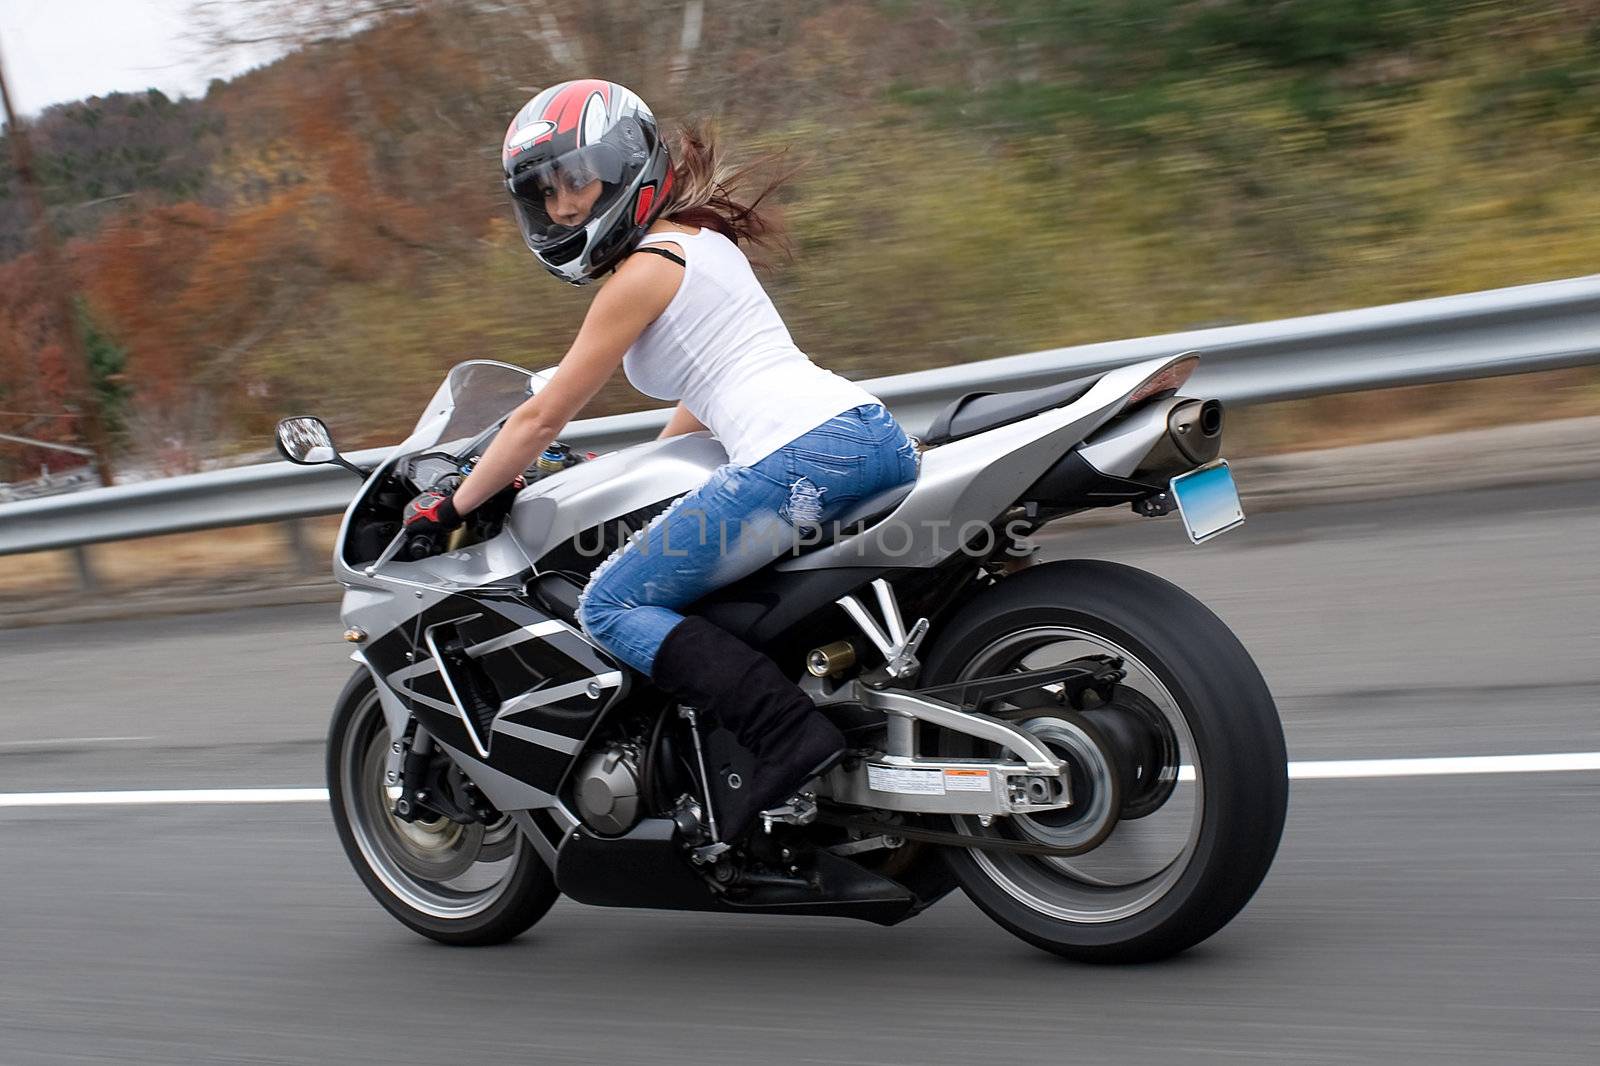 A pretty blonde girl in action driving a motorcycle at highway speeds.